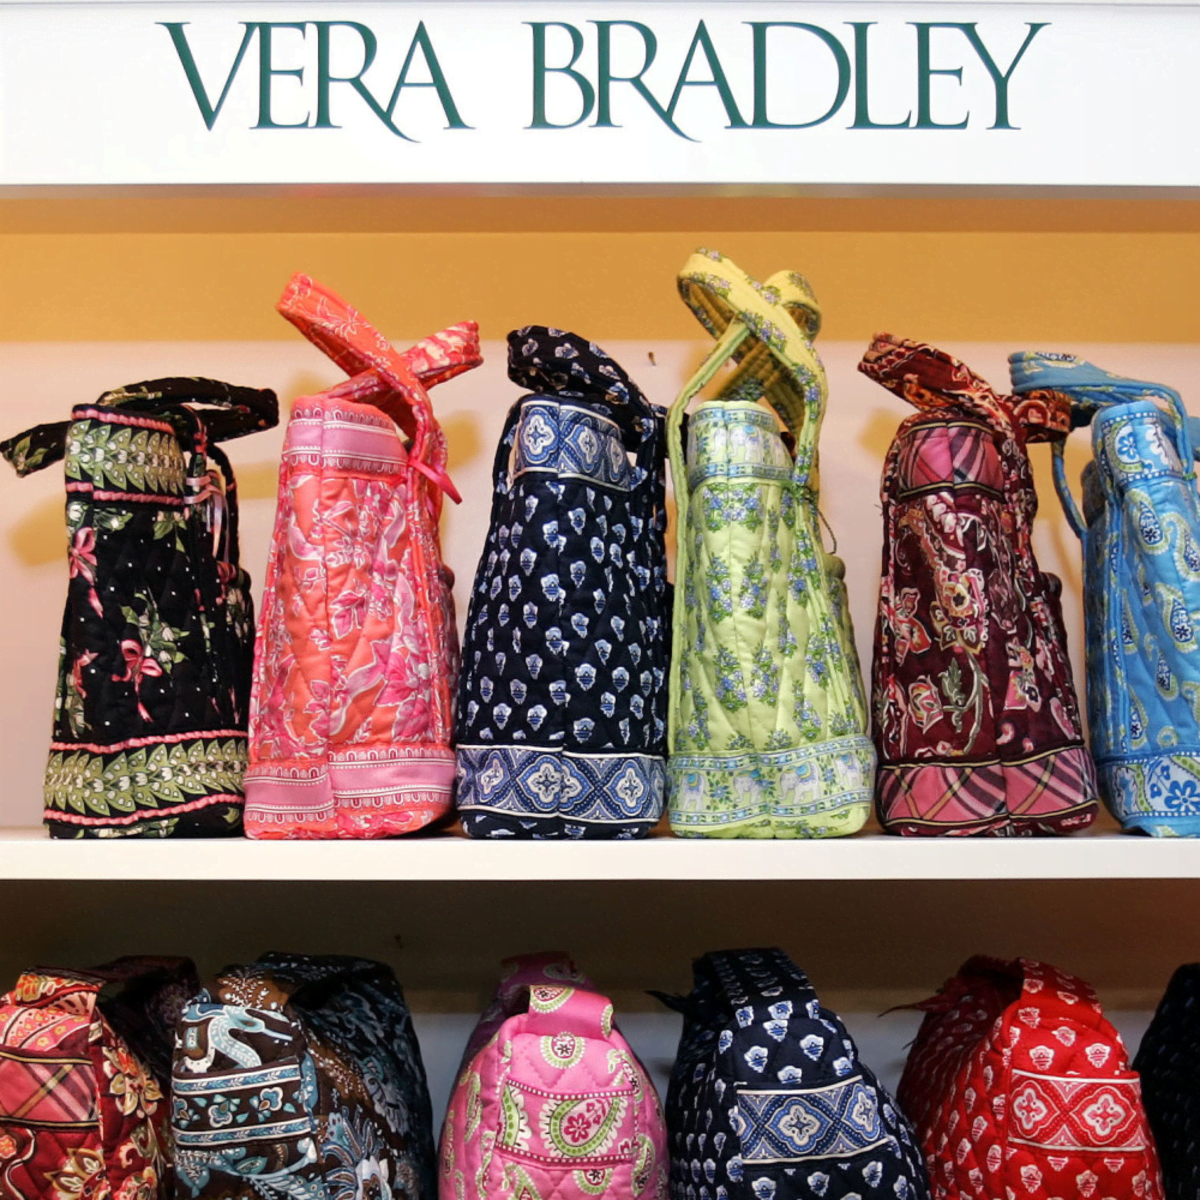 Vera Bradley's New 'Star Wars' Collection Will Take You to a Galaxy Far,  Far Away